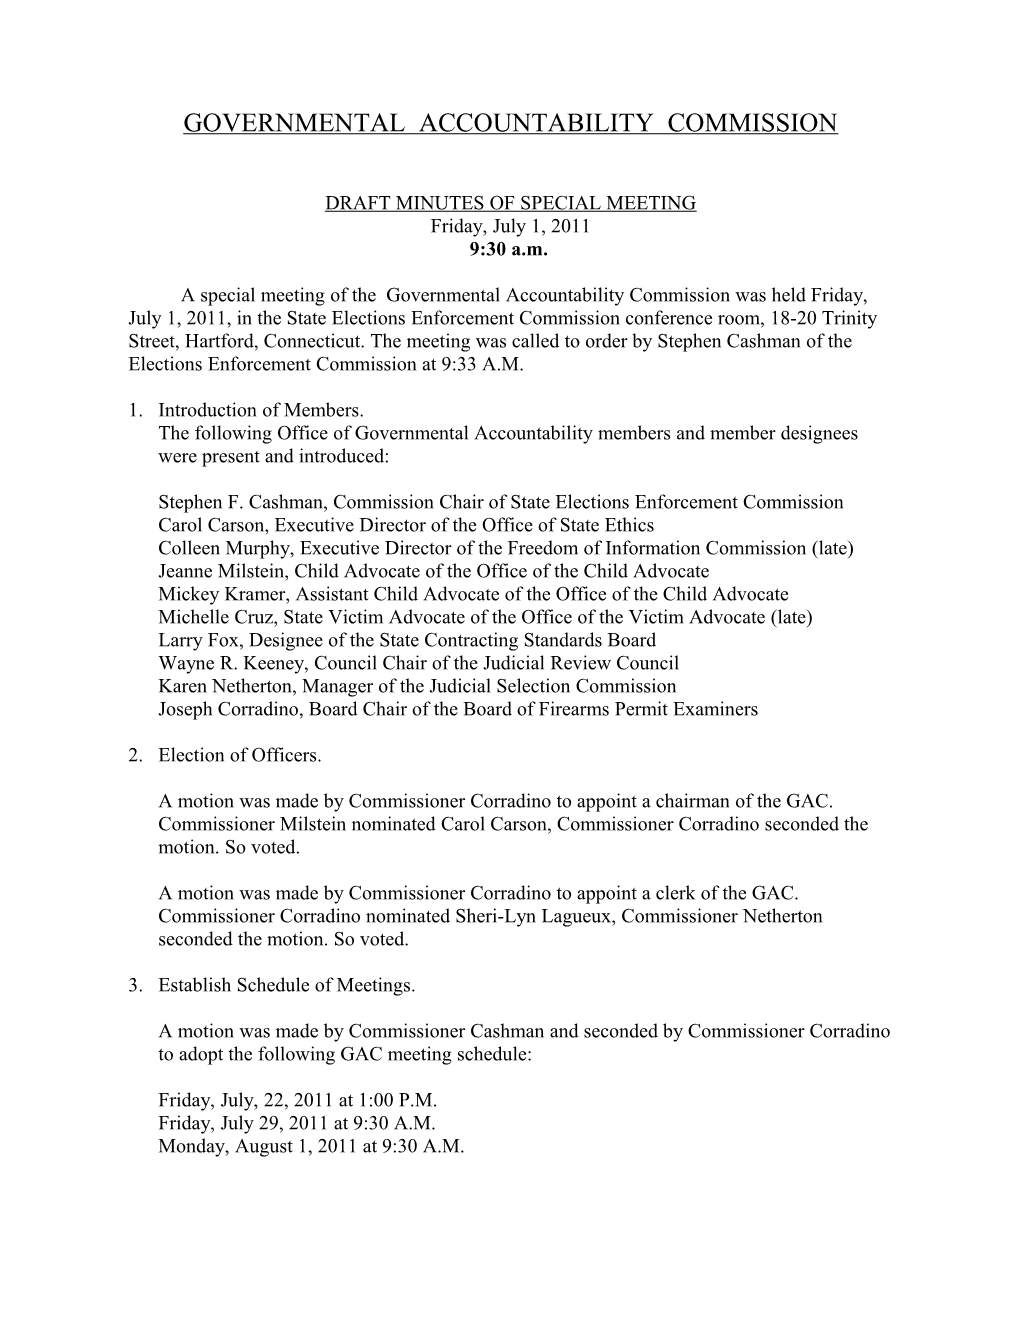 Draft Minutes of Special Meeting